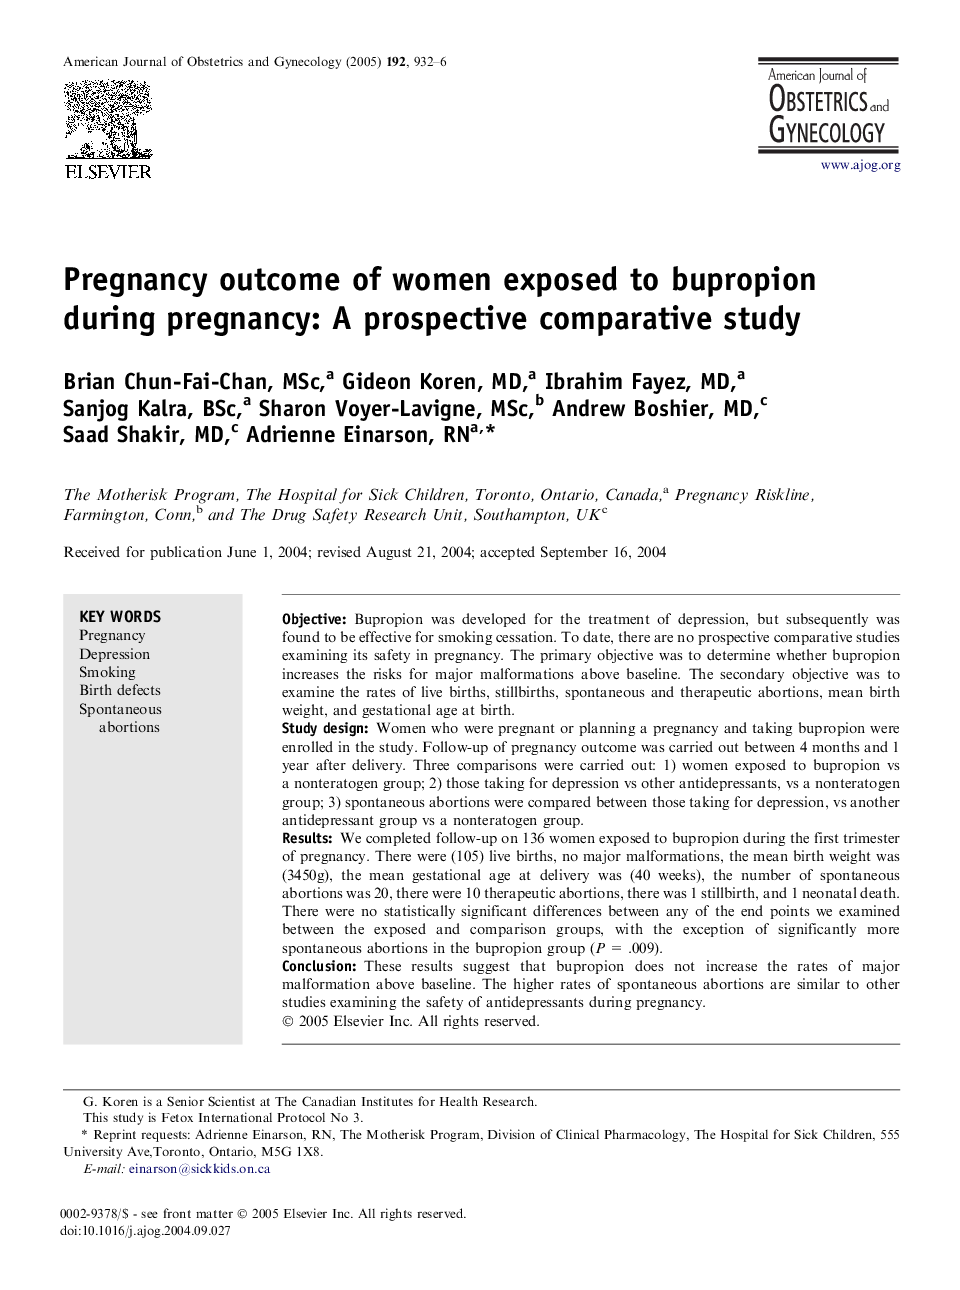 Pregnancy outcome of women exposed to bupropion during pregnancy: A prospective comparative study